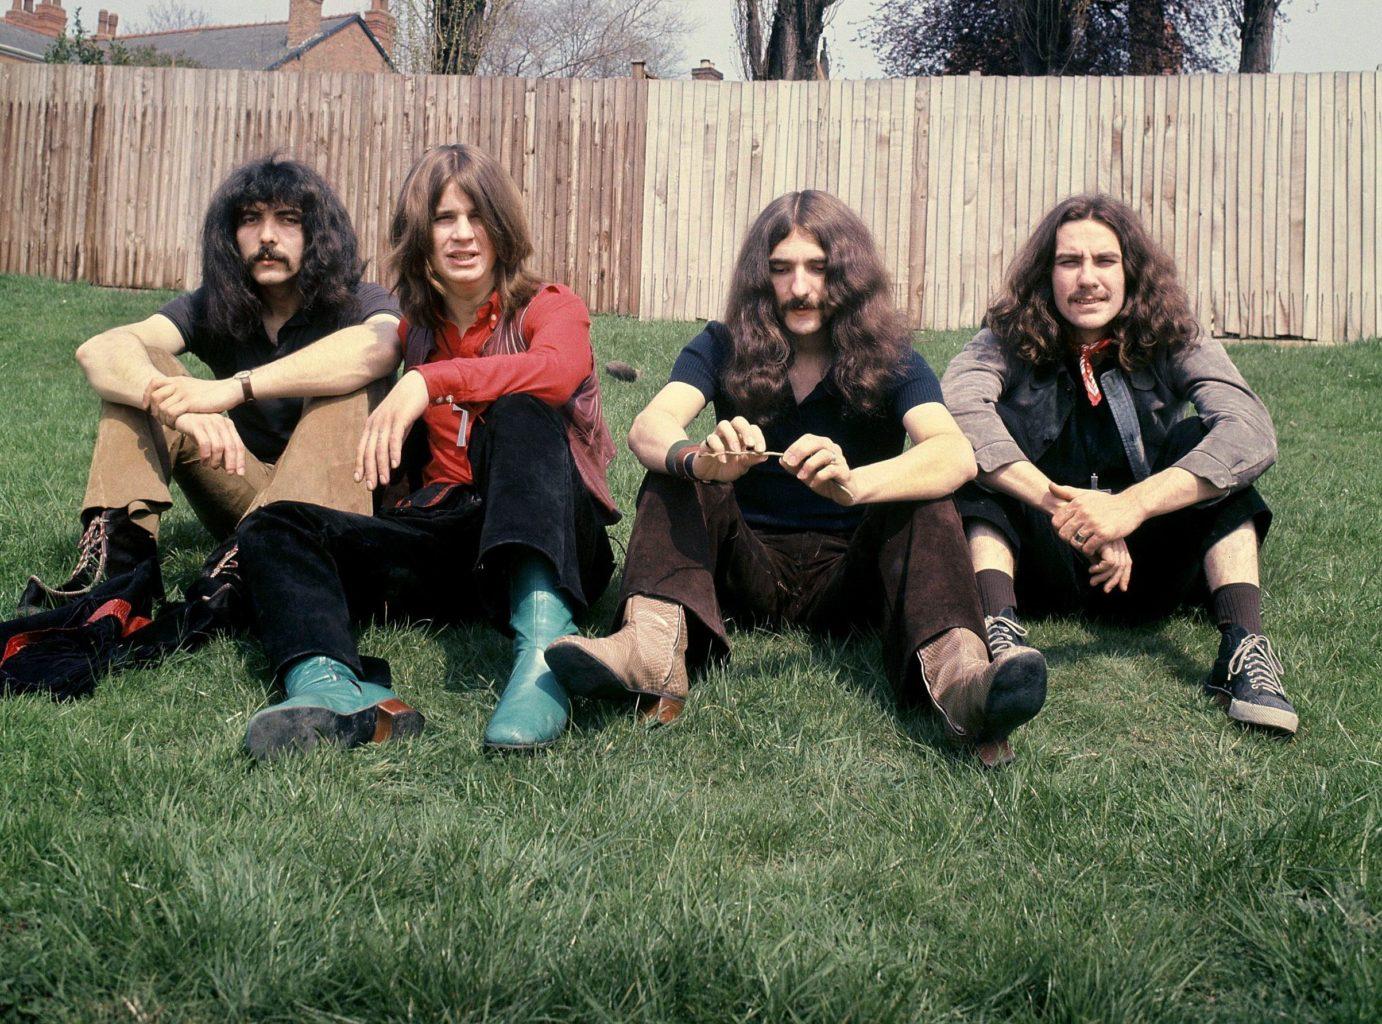 Black Sabbath pictured in their early years by Jim Simpson outside his home in Edgbaston